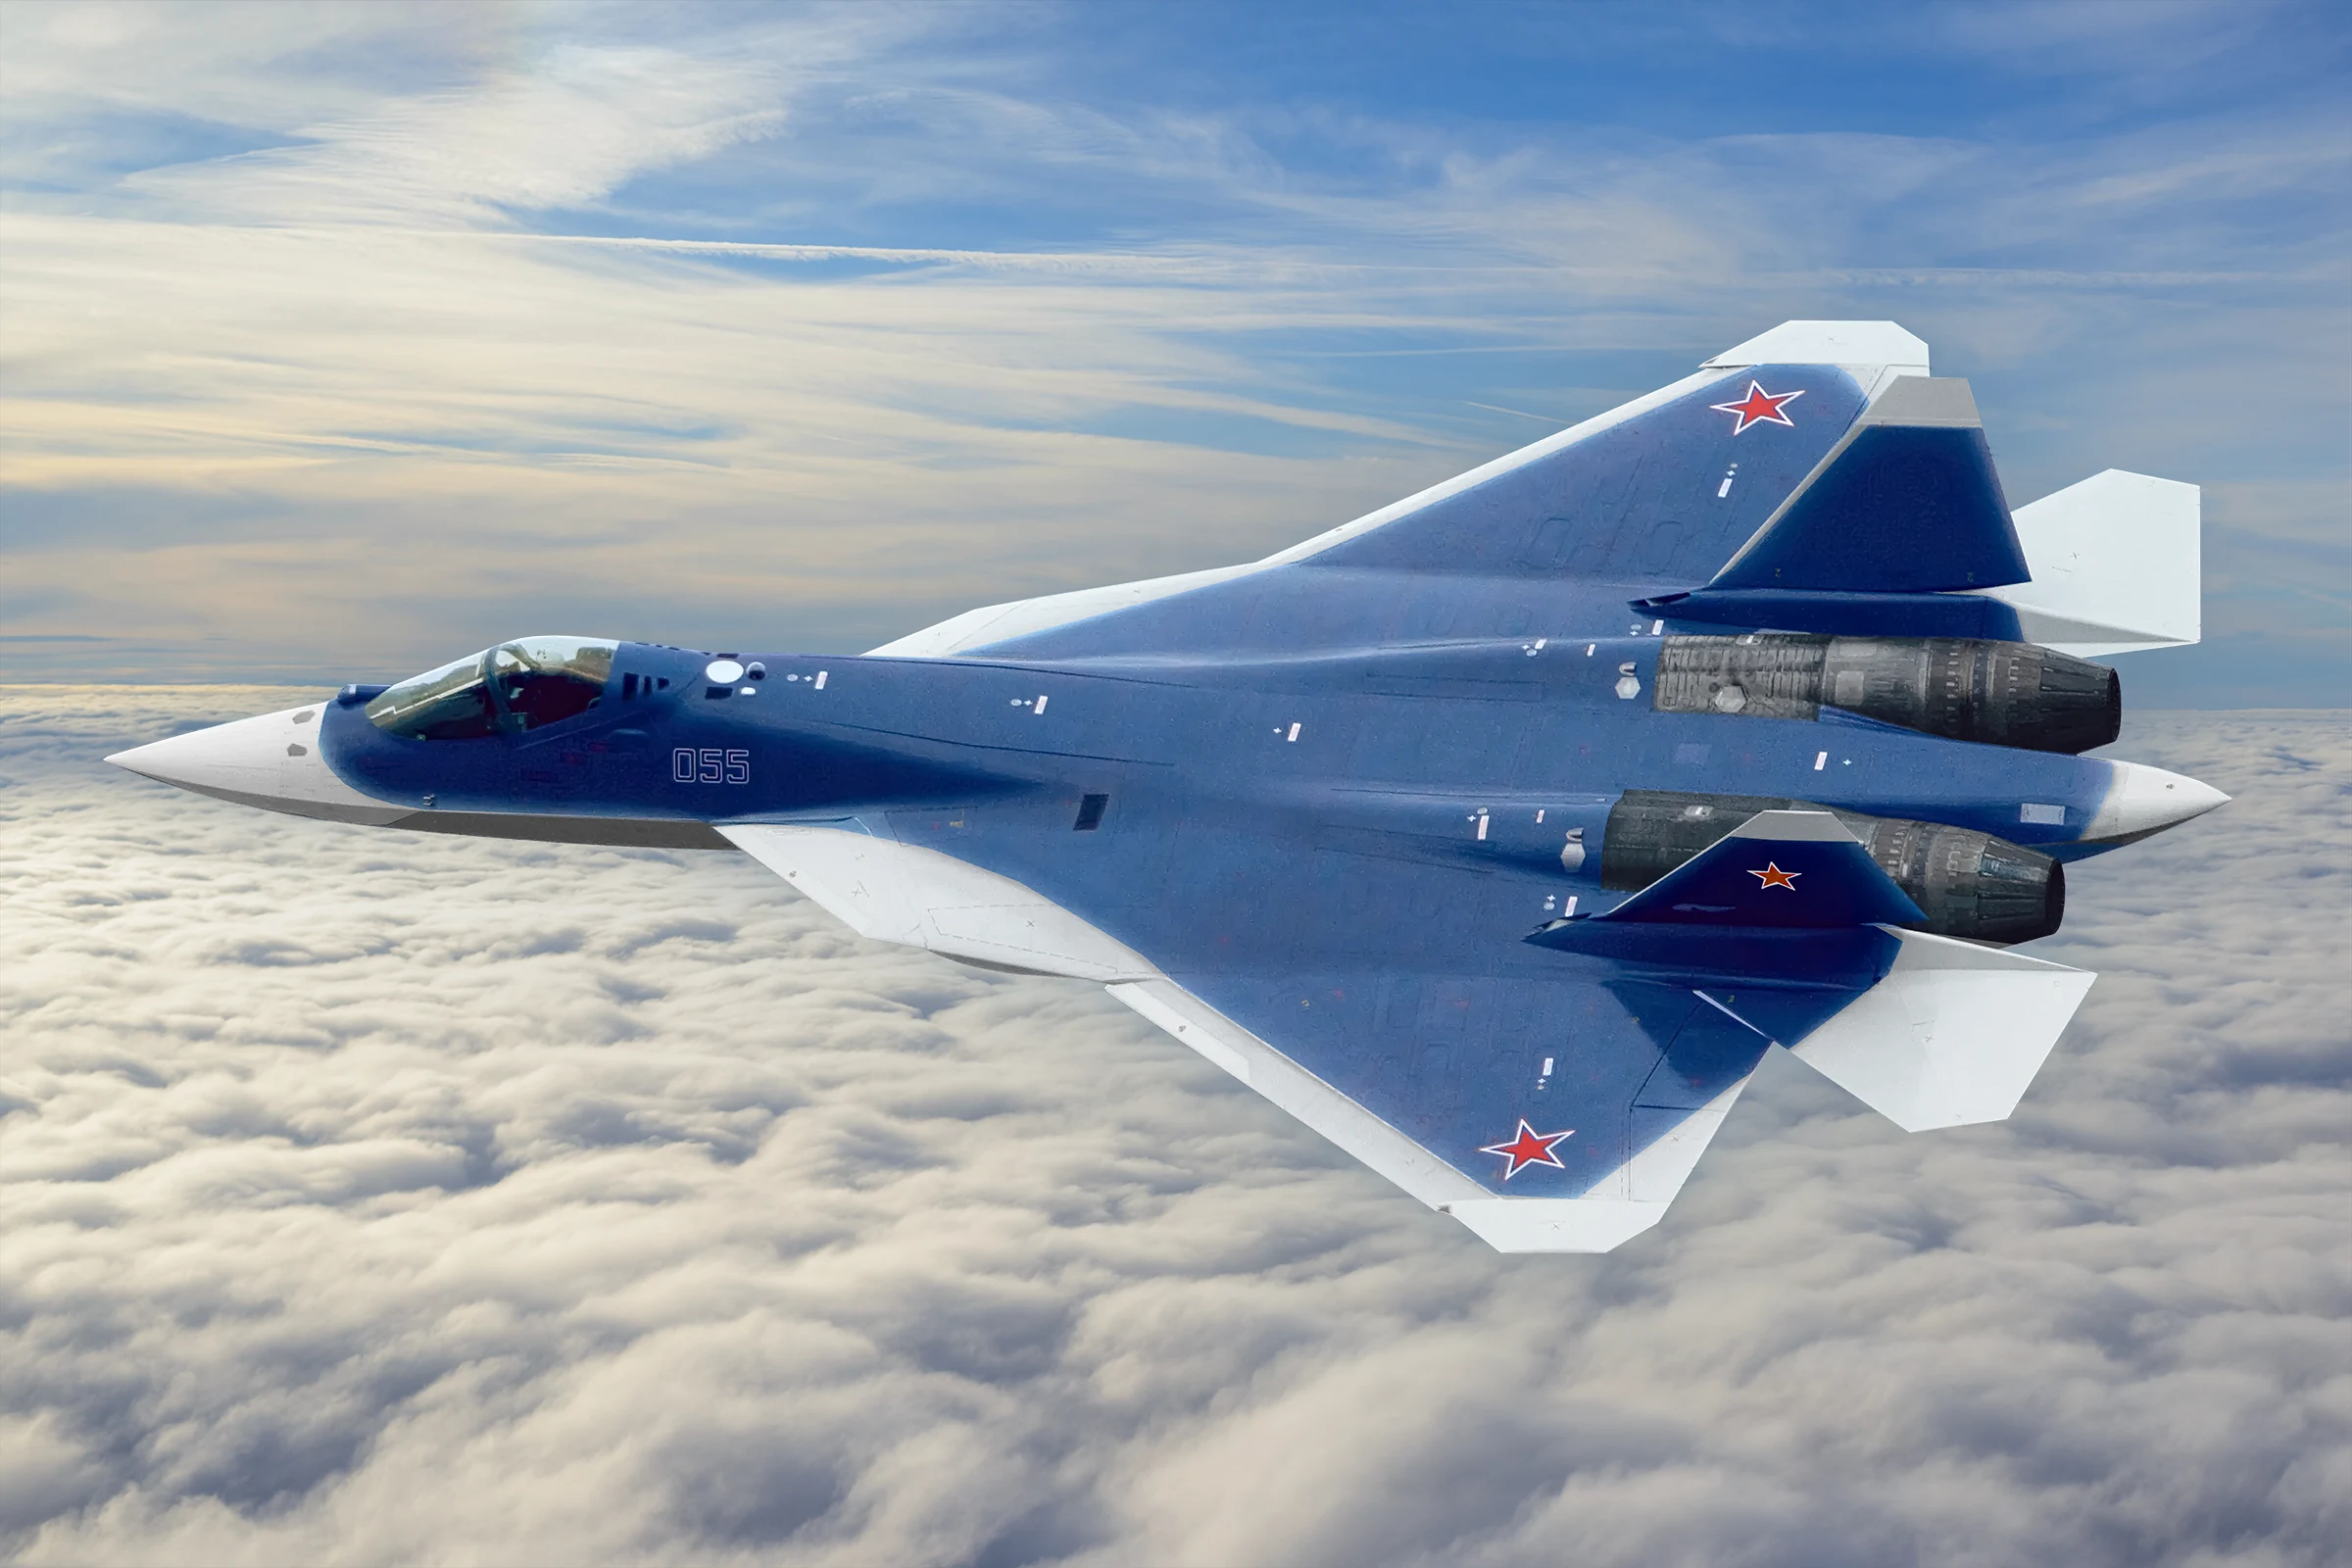 The Sukhoi Su-57 is not a true milestone in military aviation